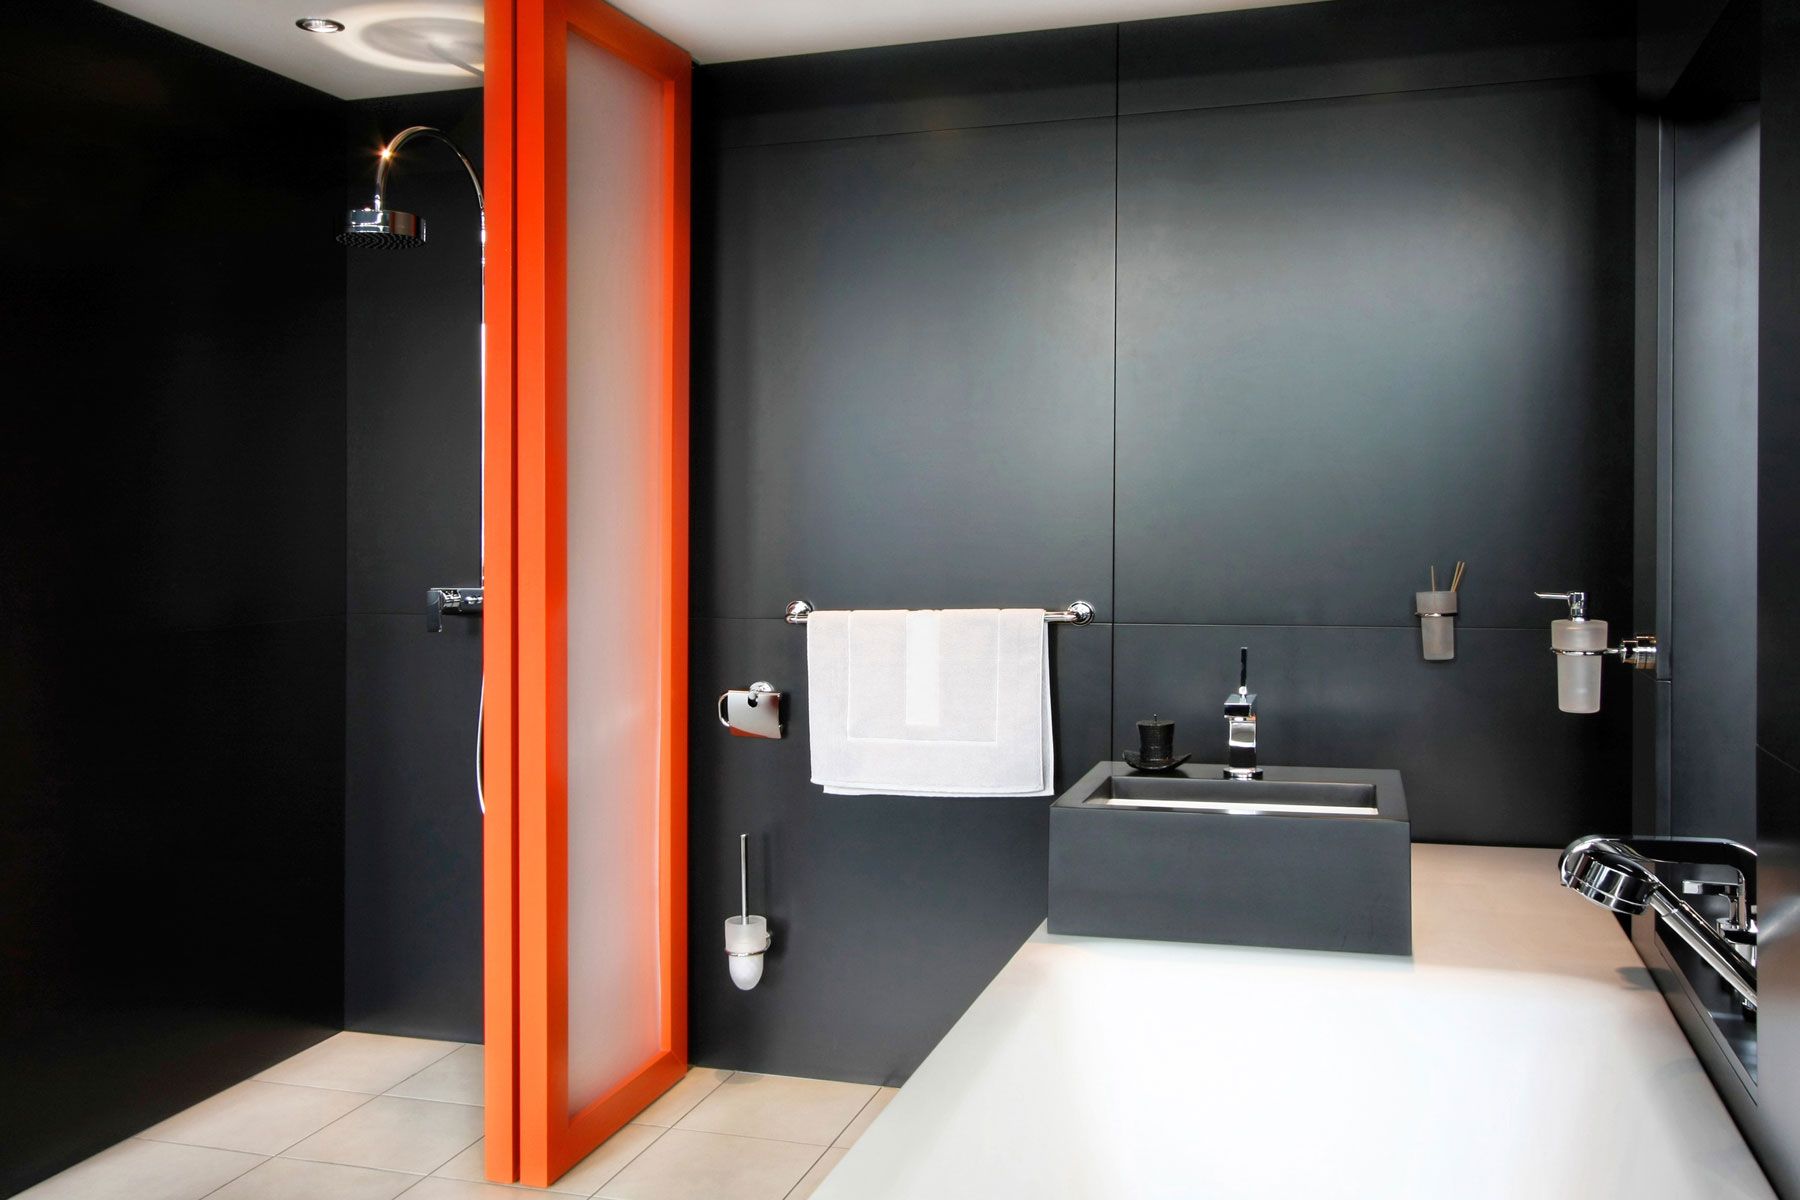 Infinity Wet Rooms can provide unique wet room solutions